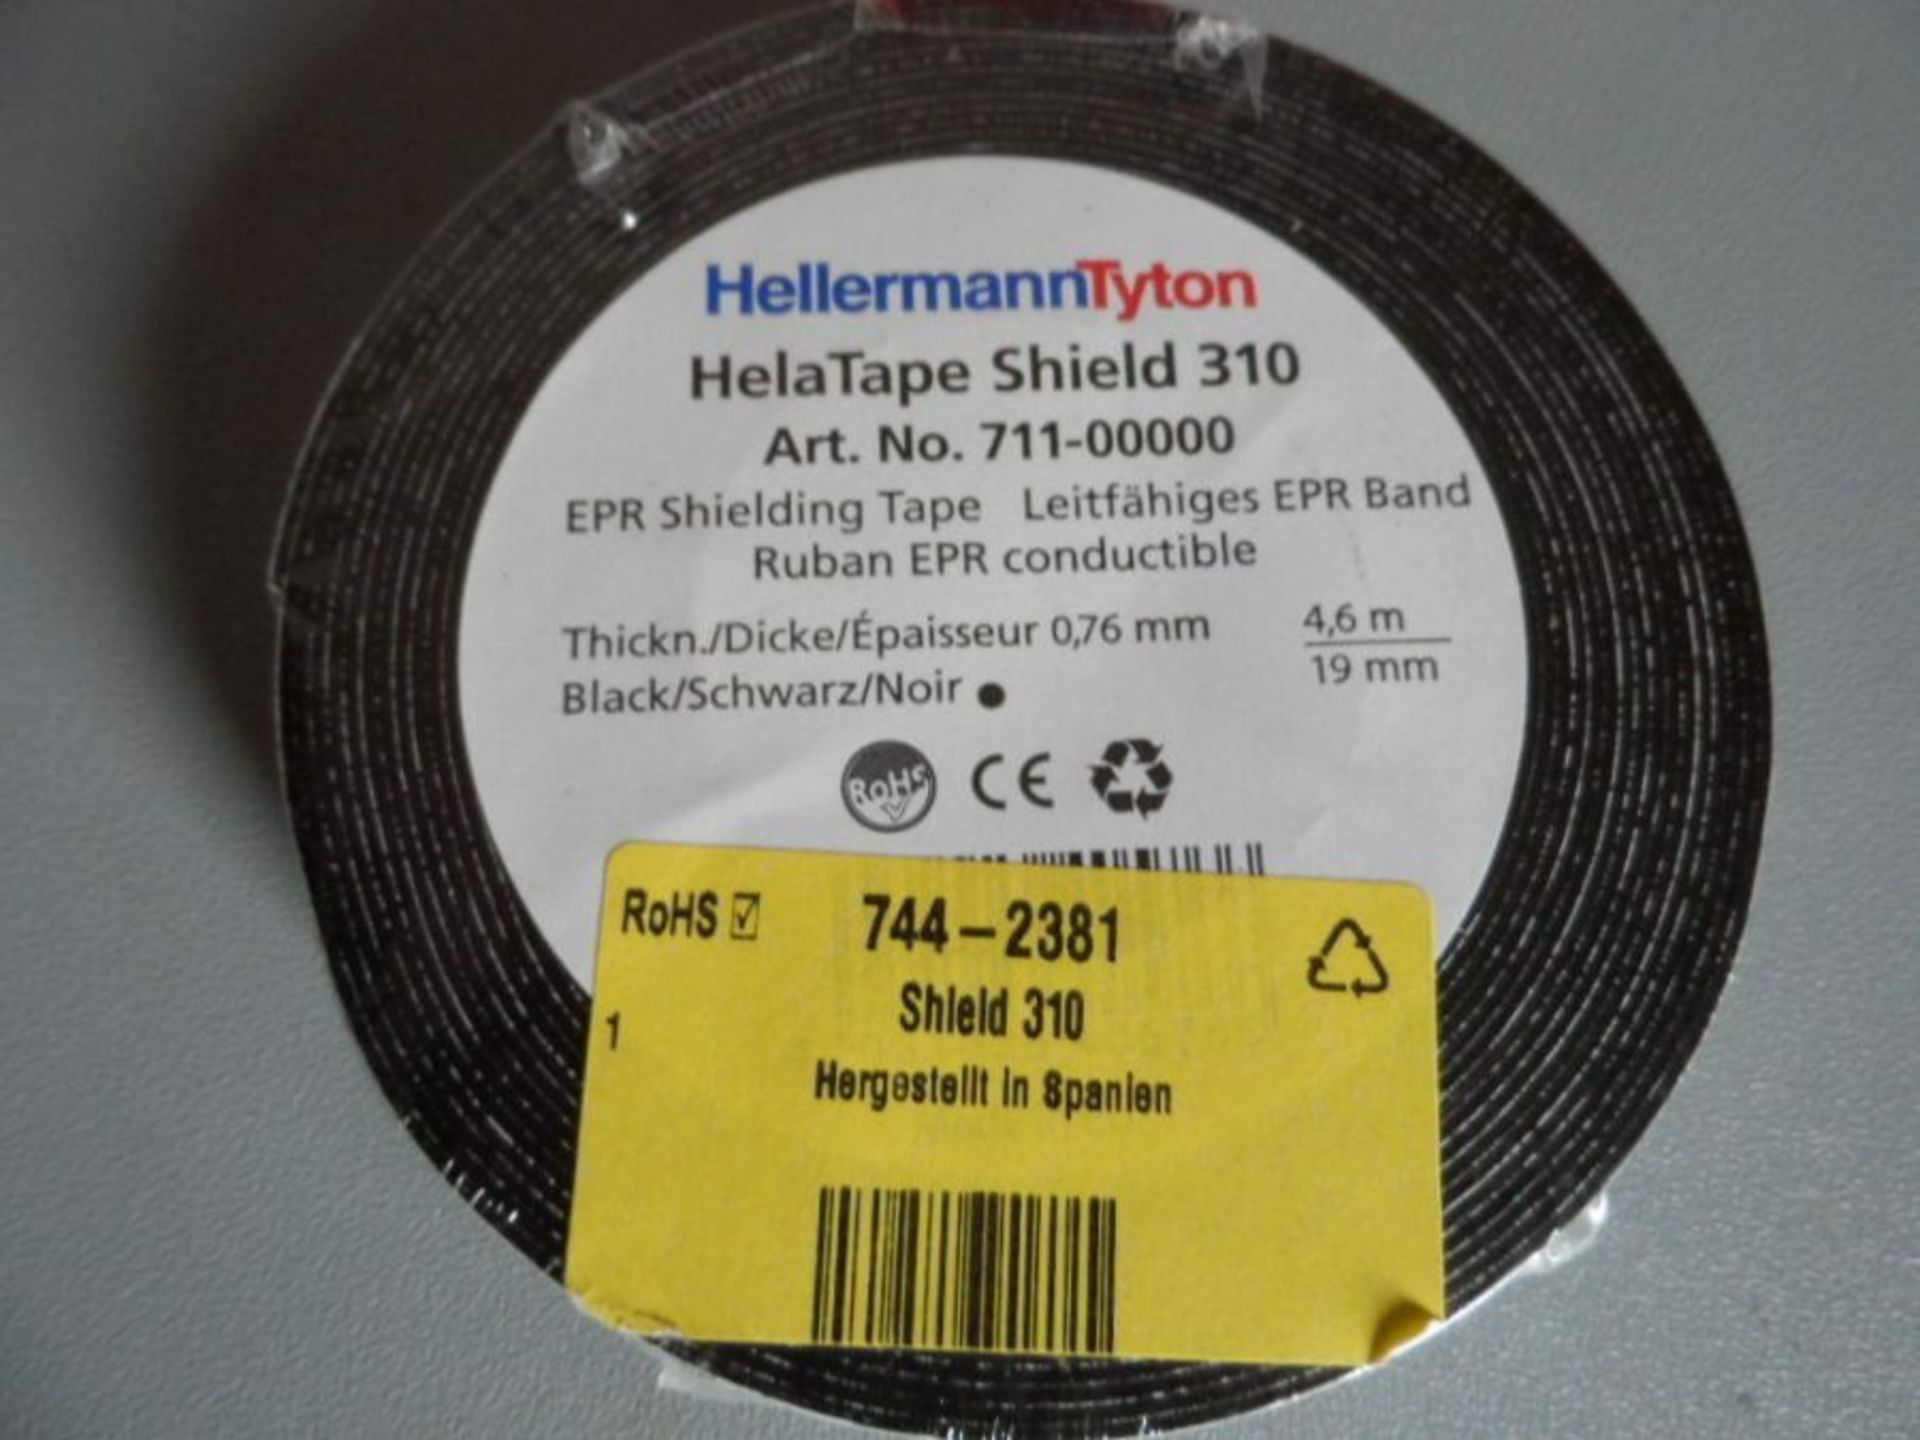 38 reels Helatape shield 310 Black Electrical Insulation Tape 19mm x 4.6m 0.76mm 7442381 - Image 2 of 2